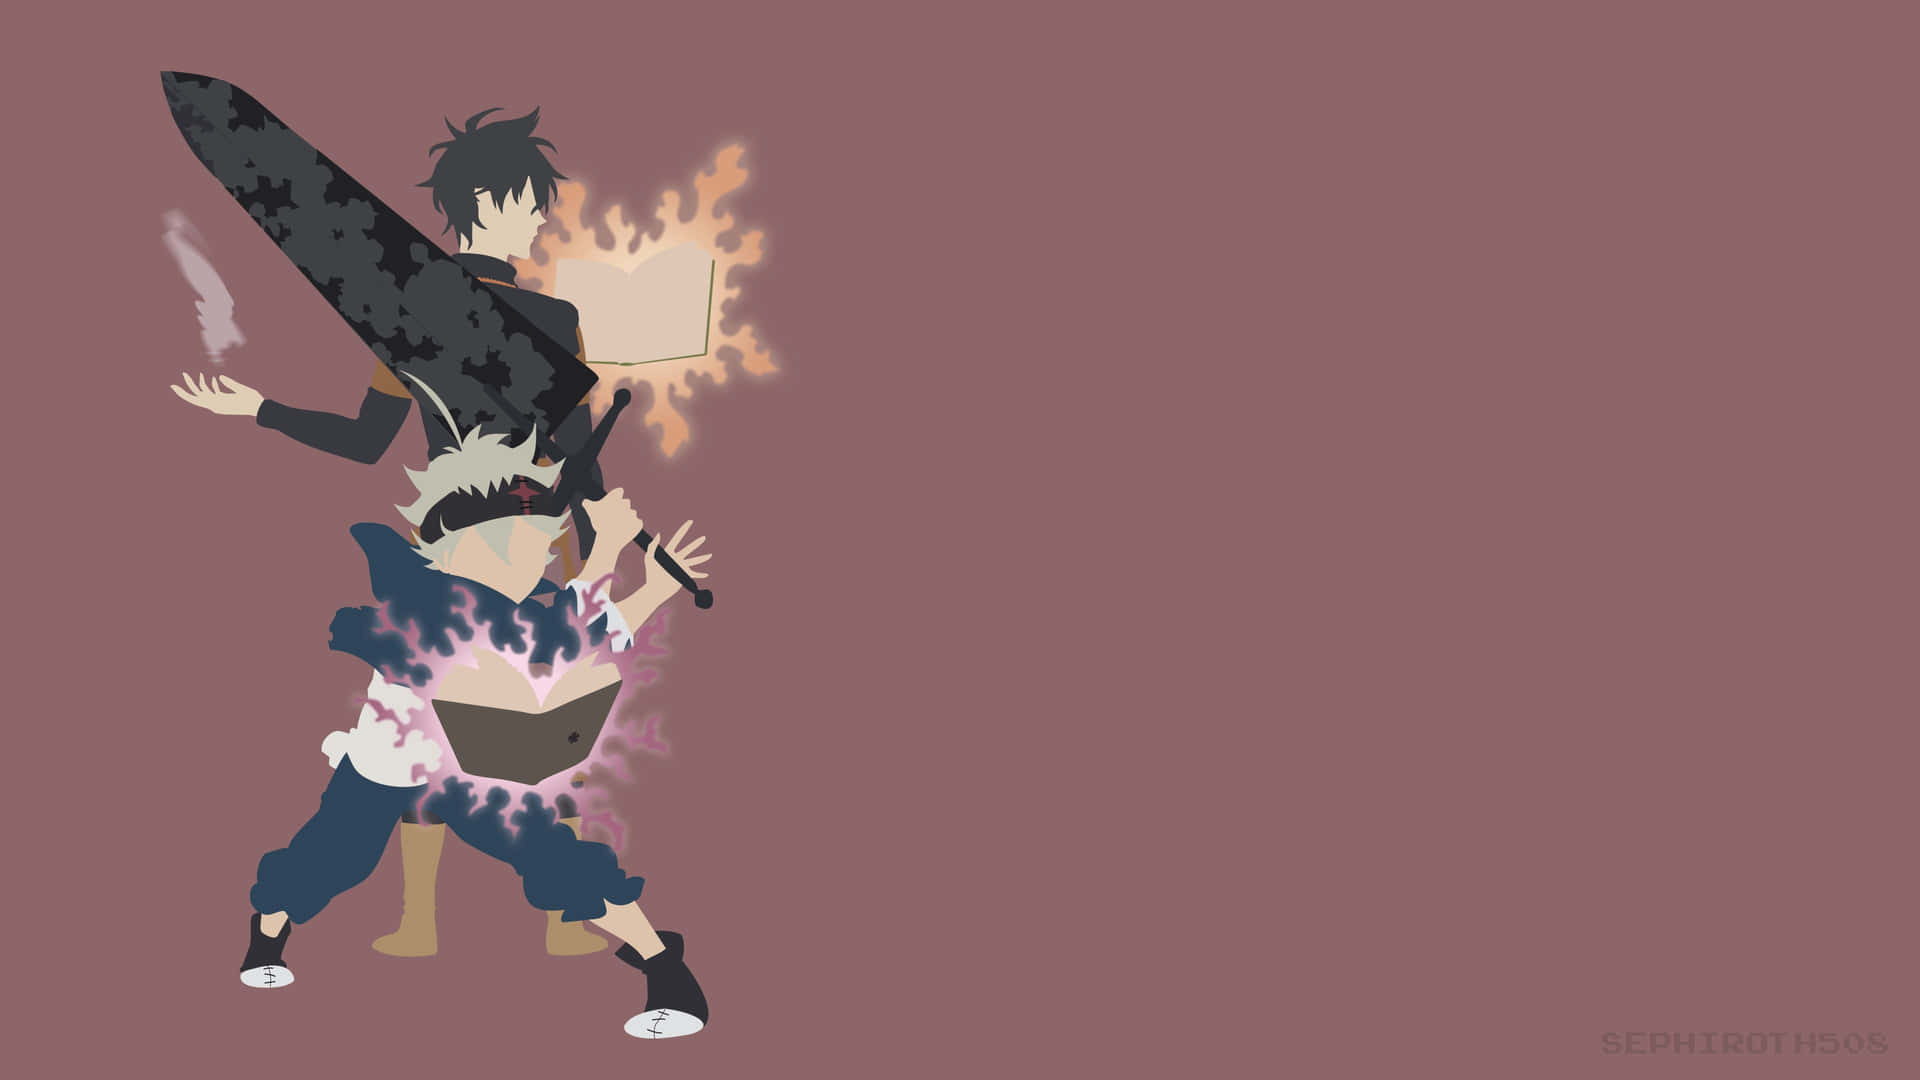 Follow Asta and the Black Bulls on their journey of becoming Wizard King! Wallpaper